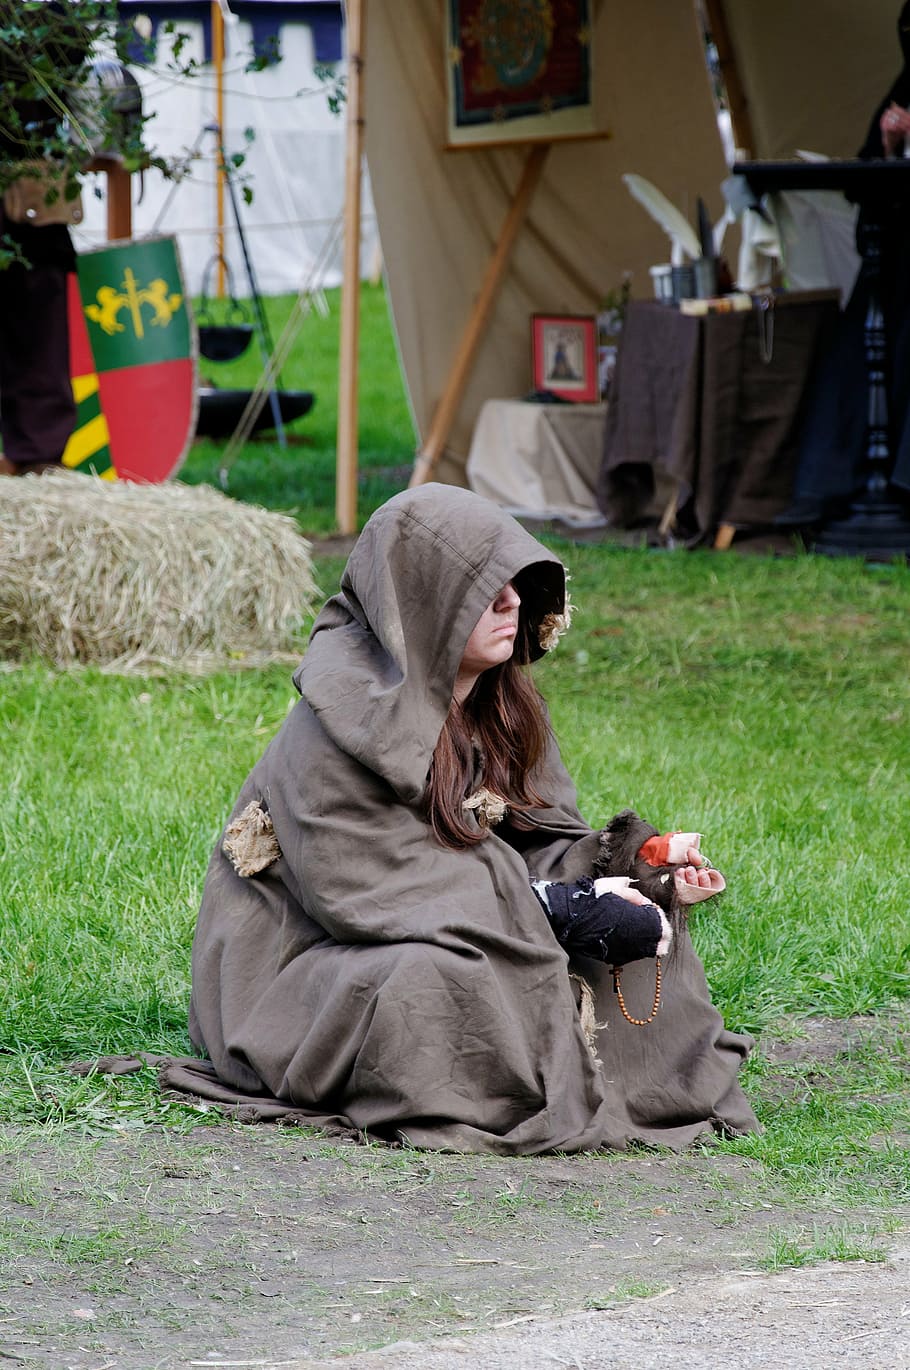 medieval market, beggars, sit, middle ages, person, rags, sitting, real people, grass, full length